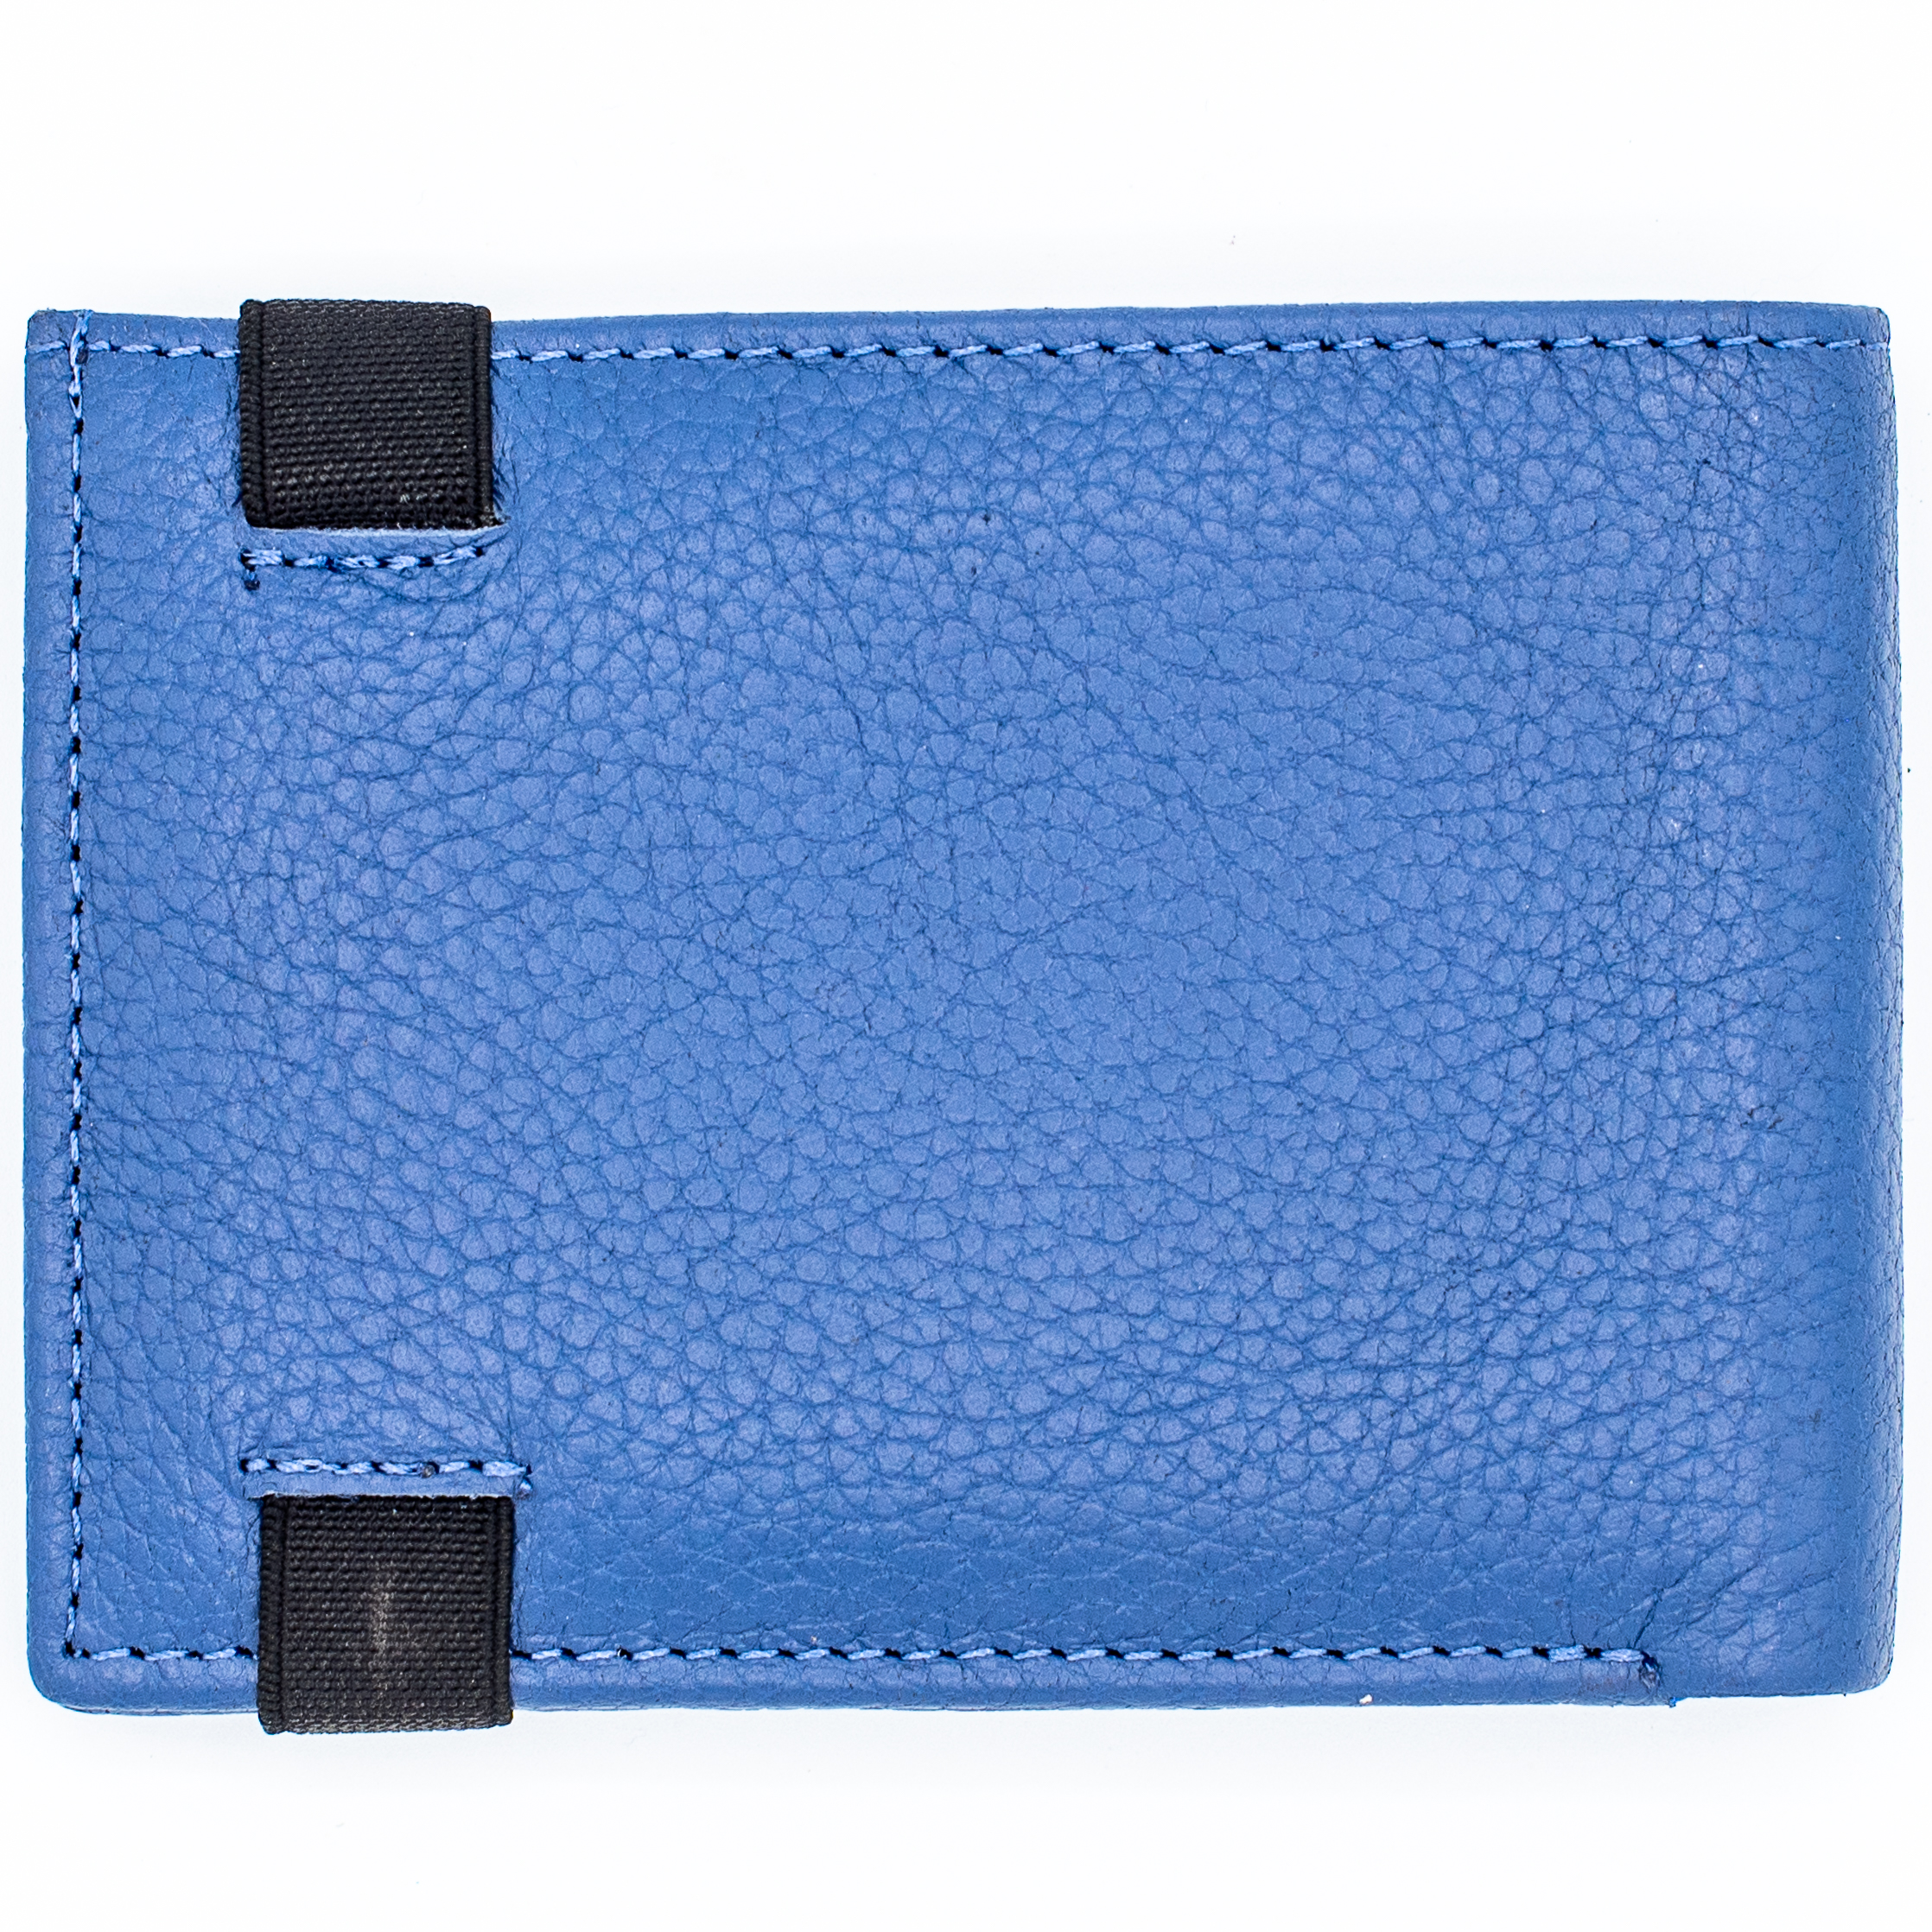 RFID Safe Biker Men's Soft Leather Bifold Chain Wallet with Elastic Card Case Navy - image 5 of 5